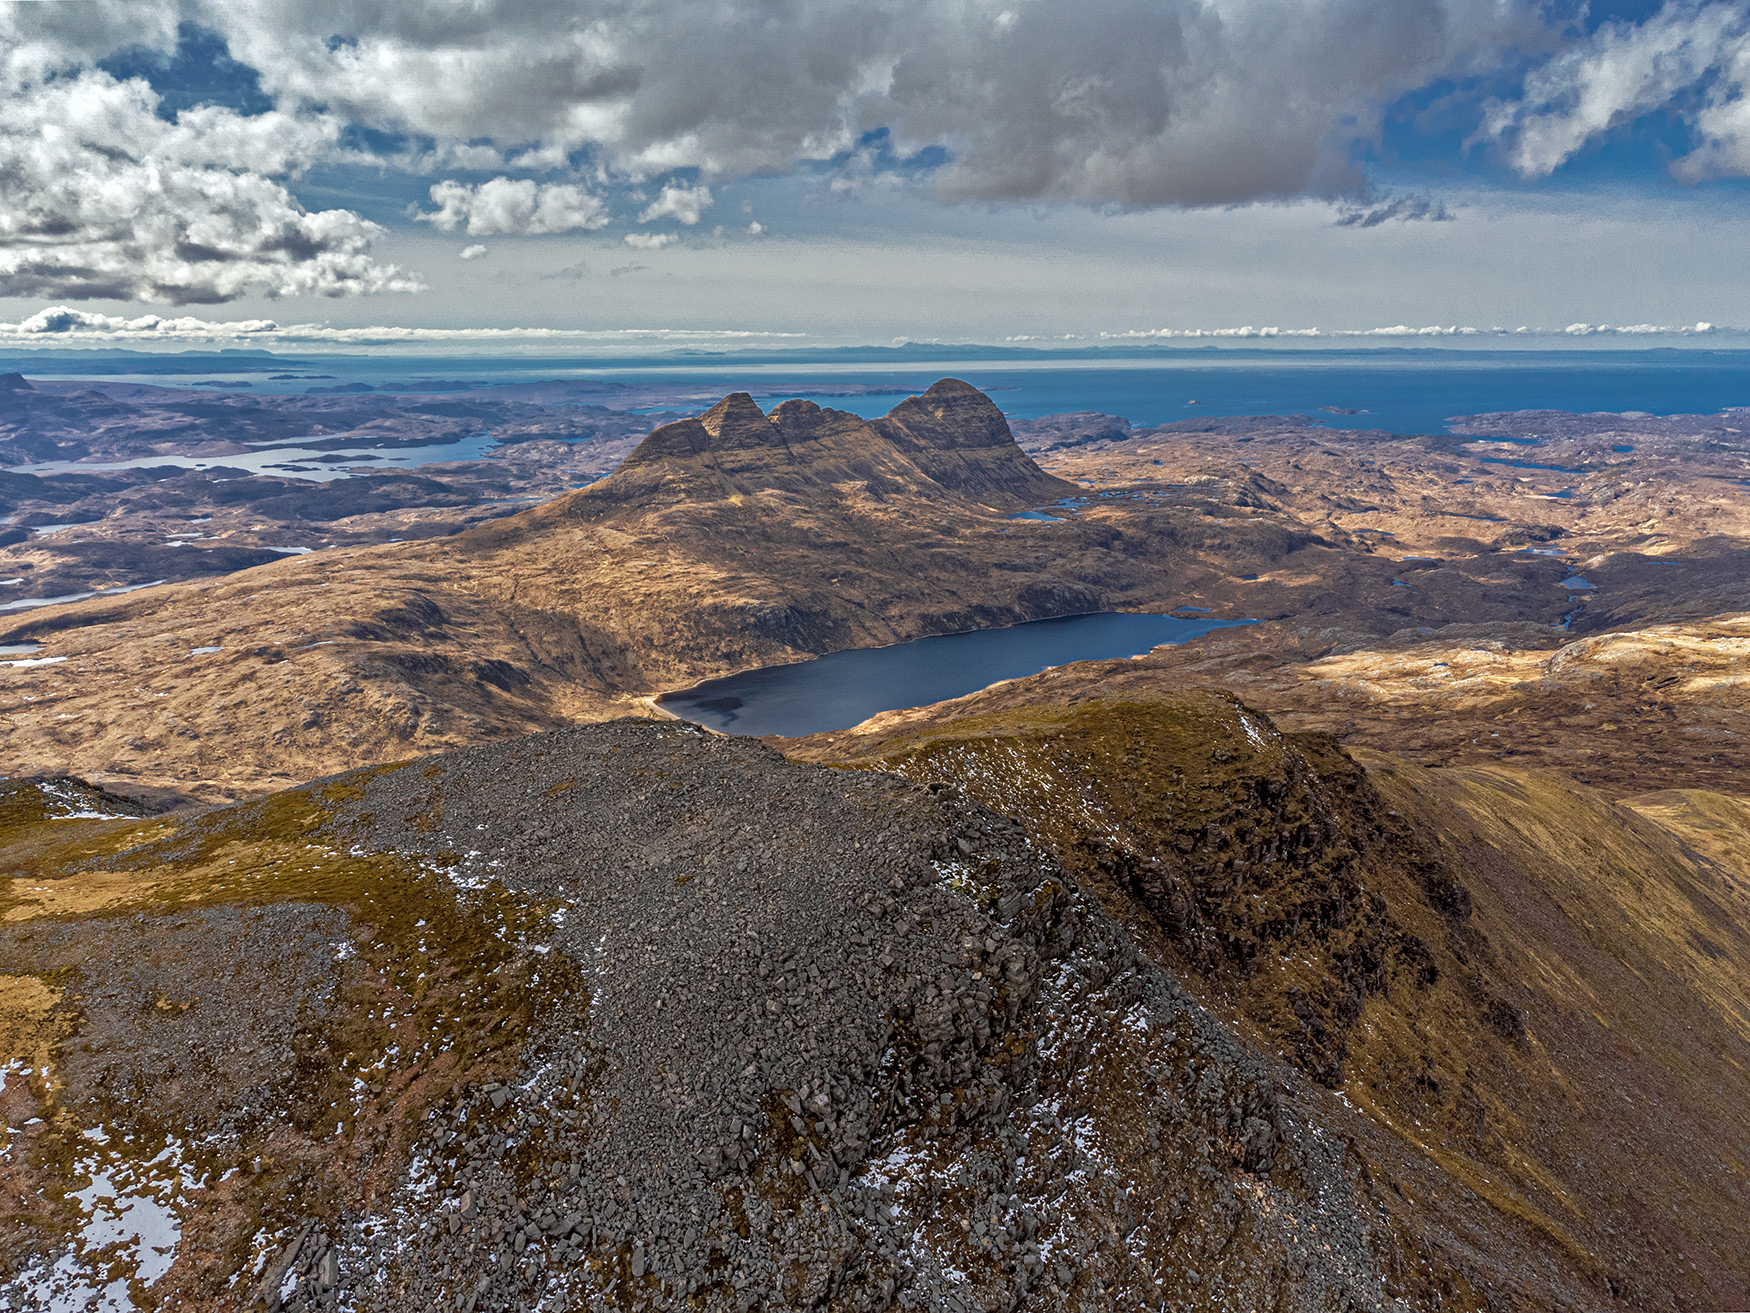 A different perspective on Suilven.